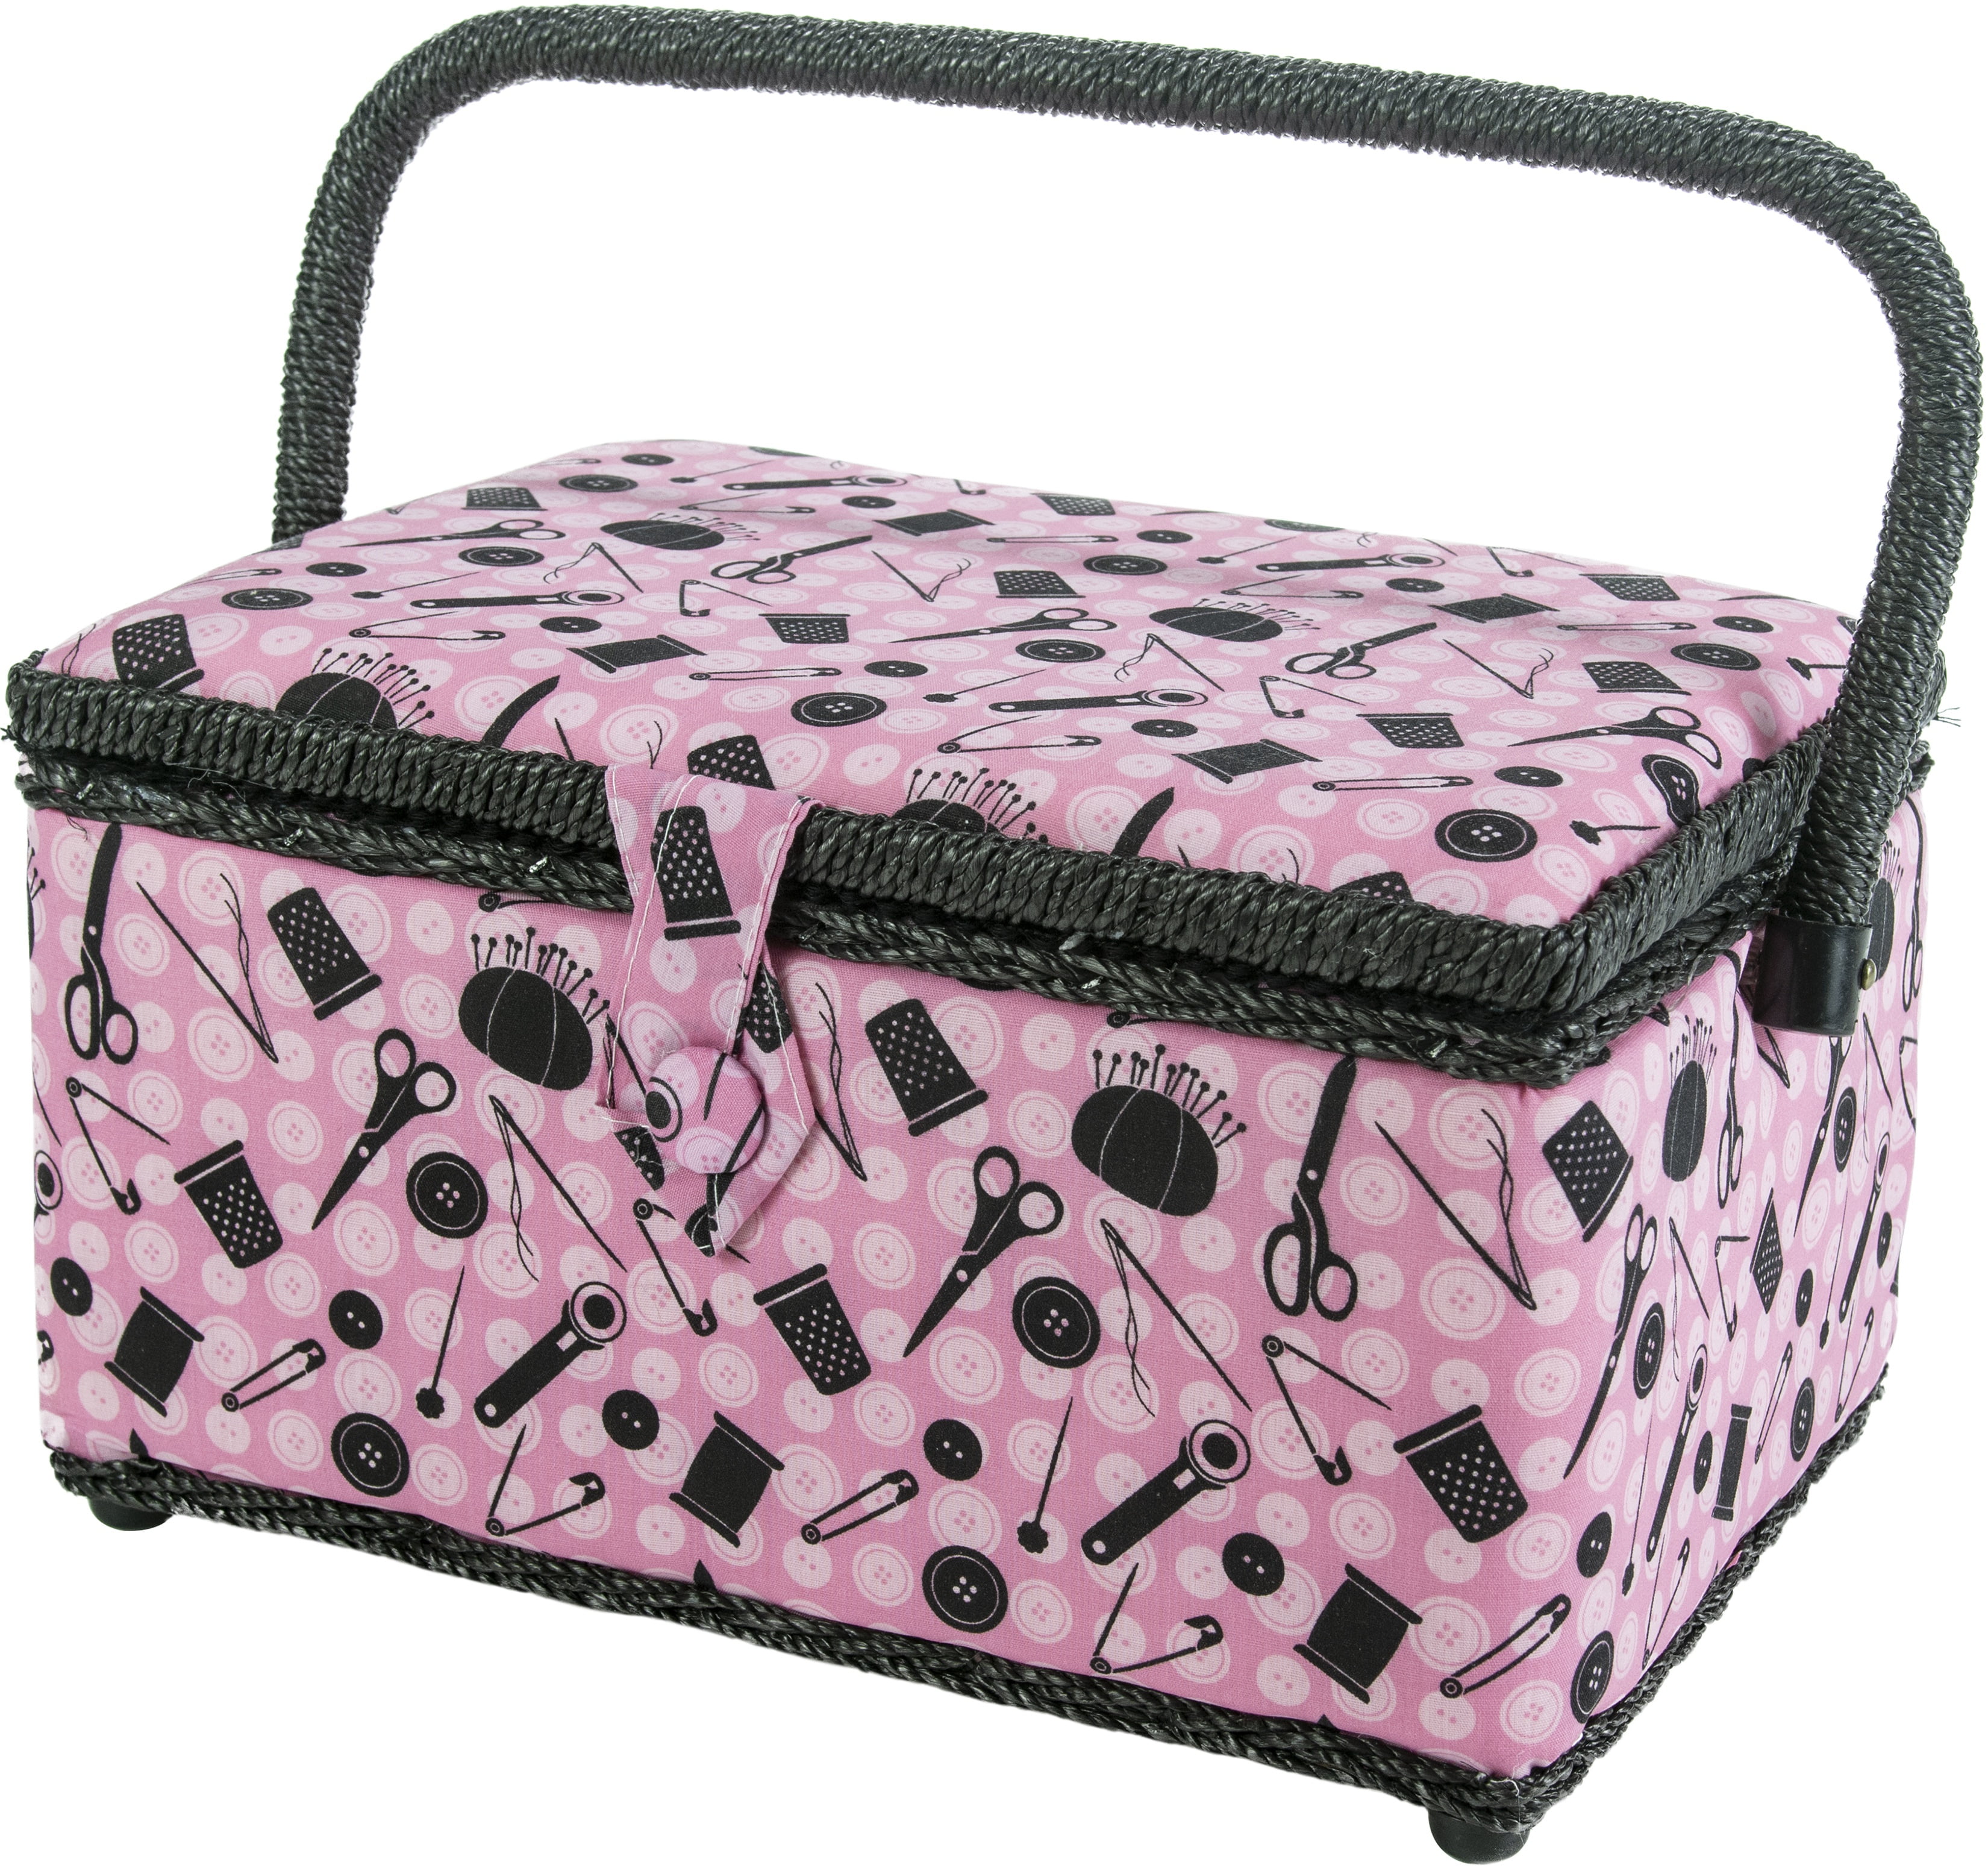 Singer® Beginners Pink Sewing Kit In Designer Pouch